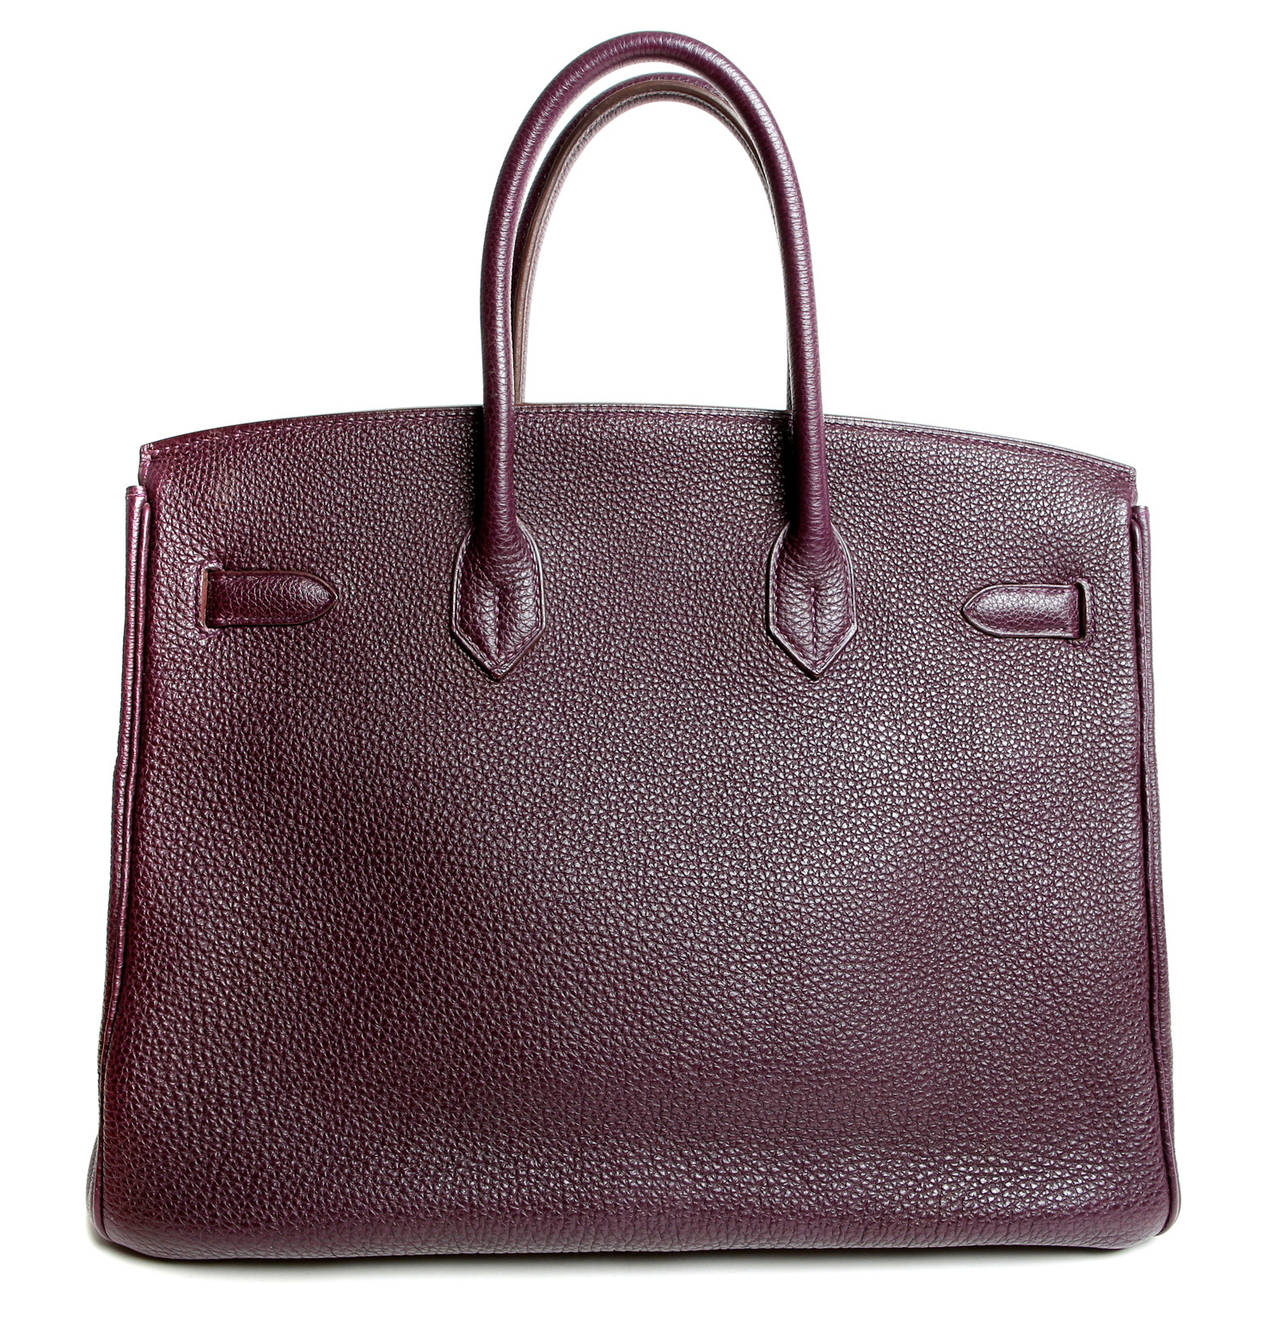 Hermès Raisin Togo Leather 35 cm Birkin  in near pristine condition

Wait lists for the handcrafted Birkin often exceed a year or more.  Raisin paired with Palladium hardware is an excellent way to introduce a hint of color to a wardrobe without